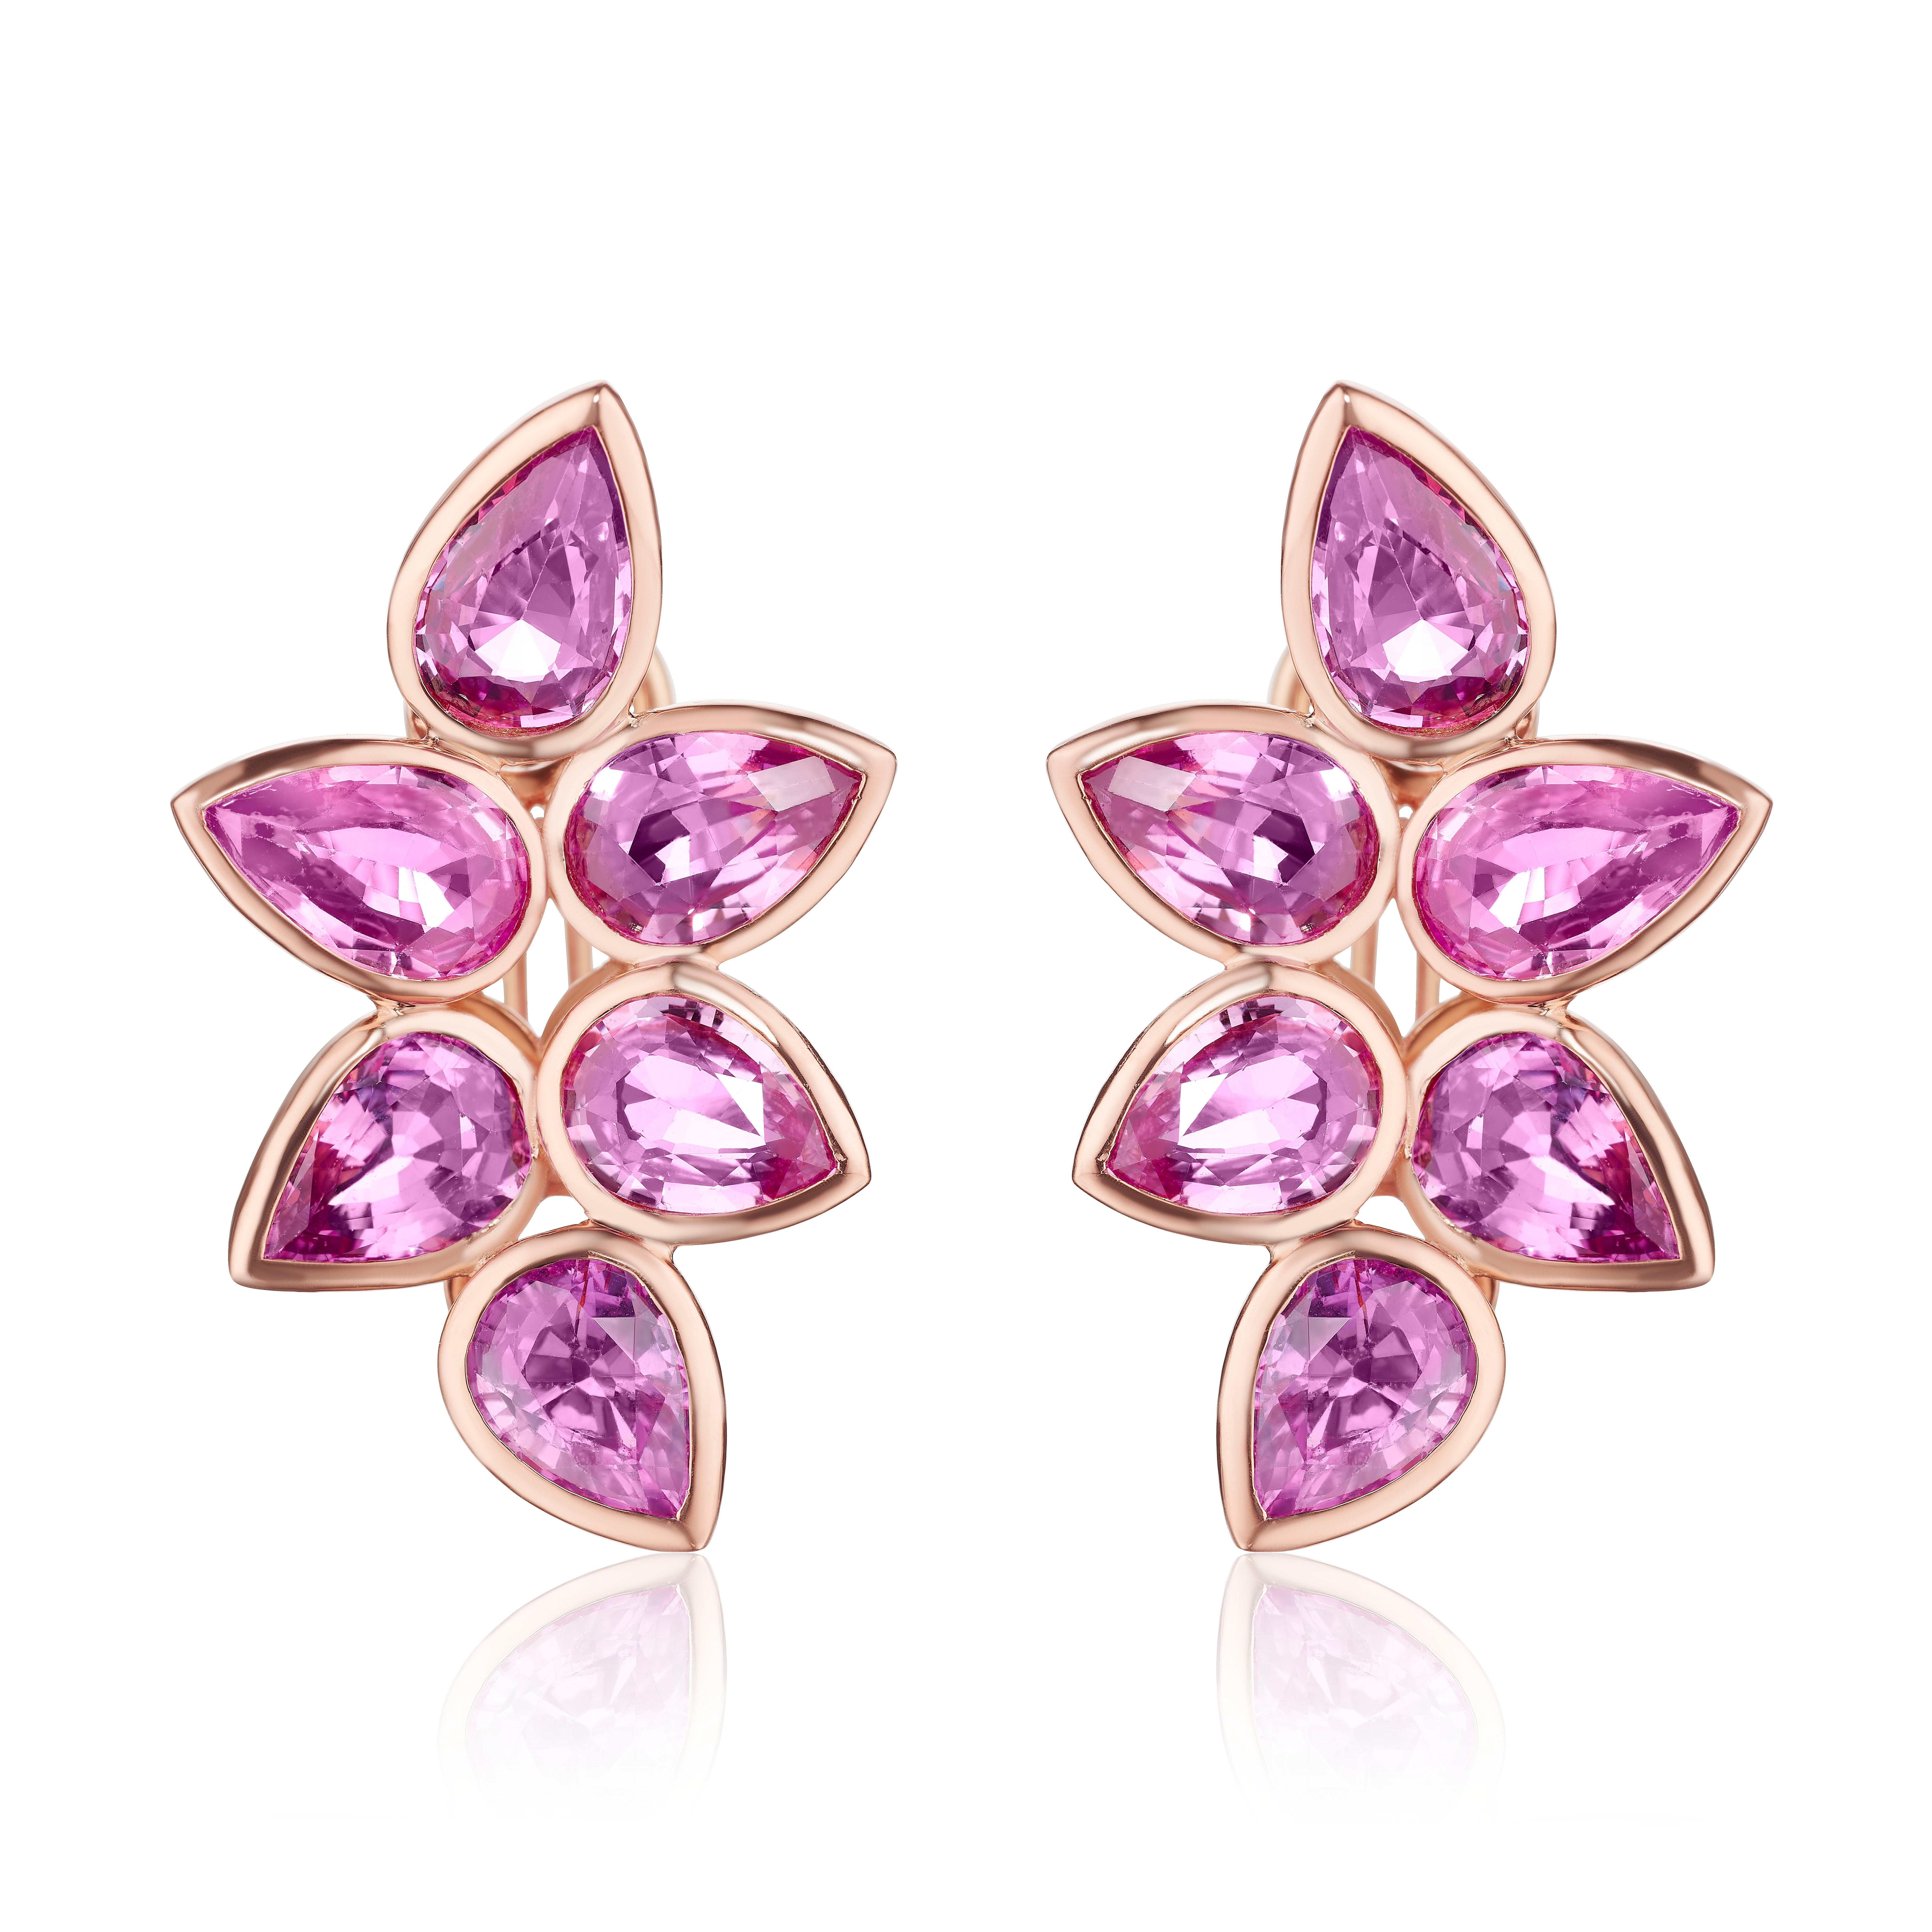 The Classic Cluster Earring. Redefined. Pink Sapphires in a Bezel Set Rose Gold.

12 Pear Shaped Pink Sapphires weighing between 1.10 and 1.50 Carat each for a total of 15.52 Carats

Set in 18 Karat Rose Gold.